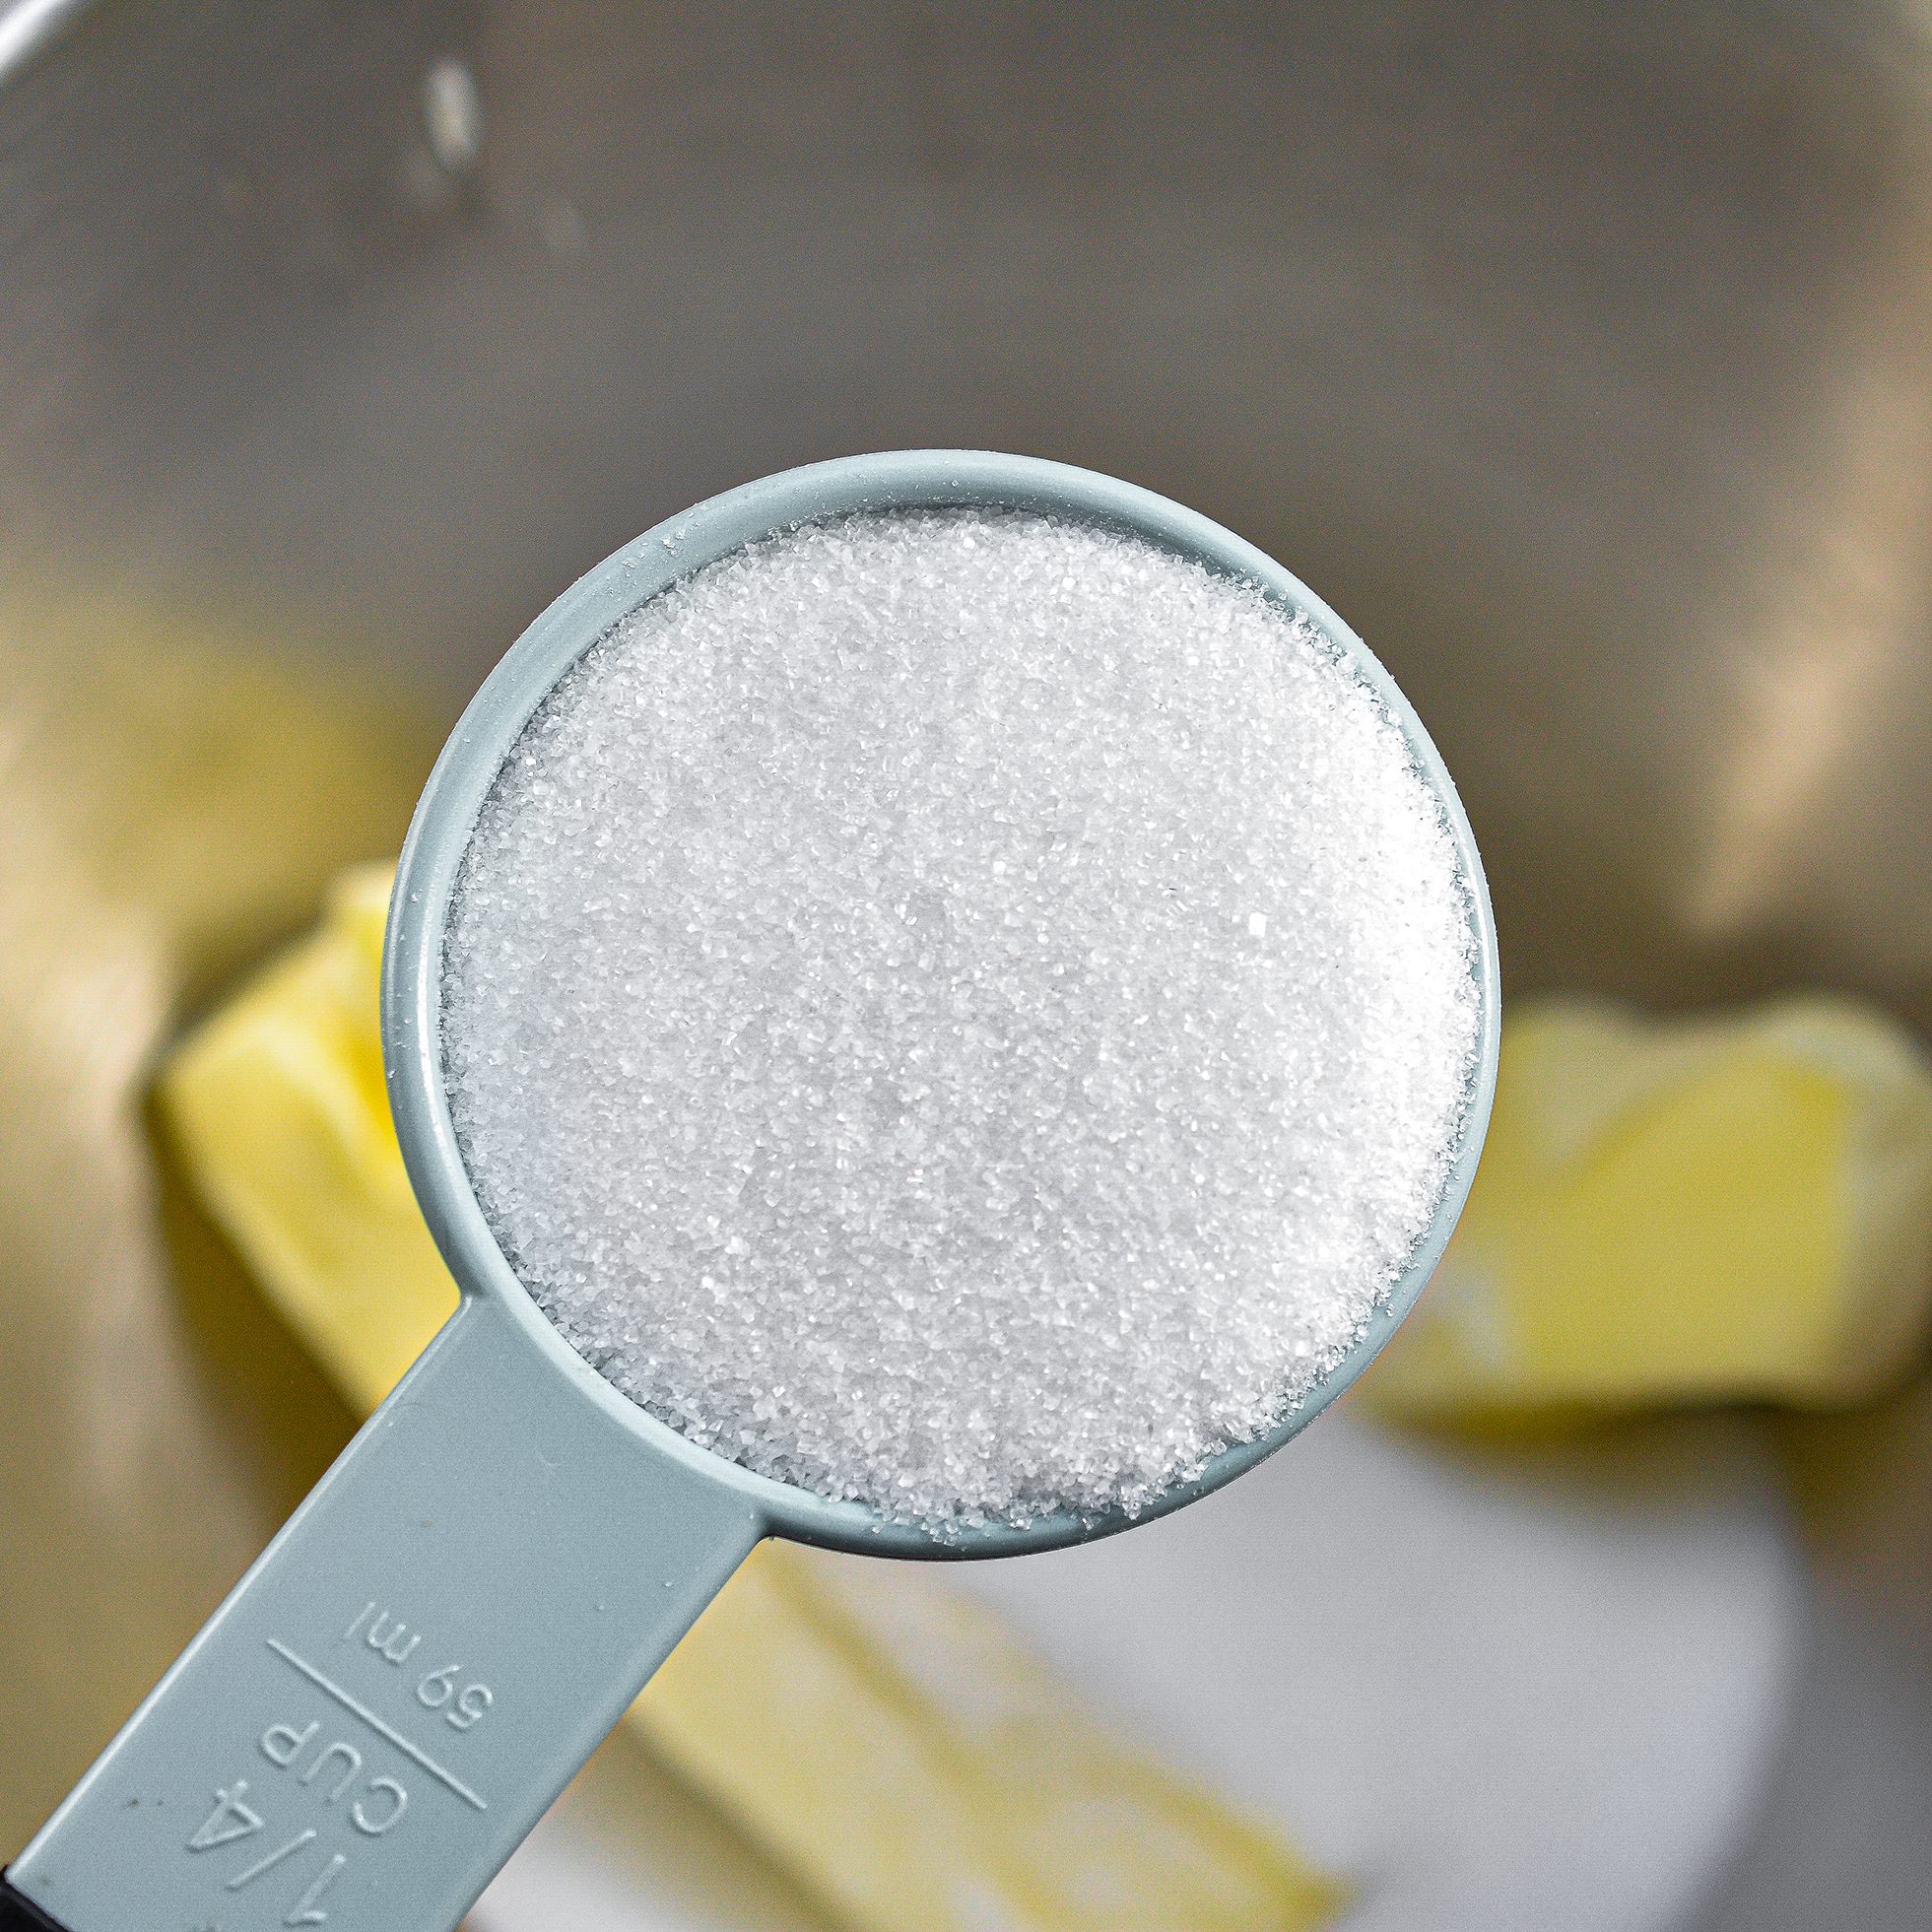 In a mixing bowl, blend together the butter, granulated sugar, brown sugar and vanilla until combined.